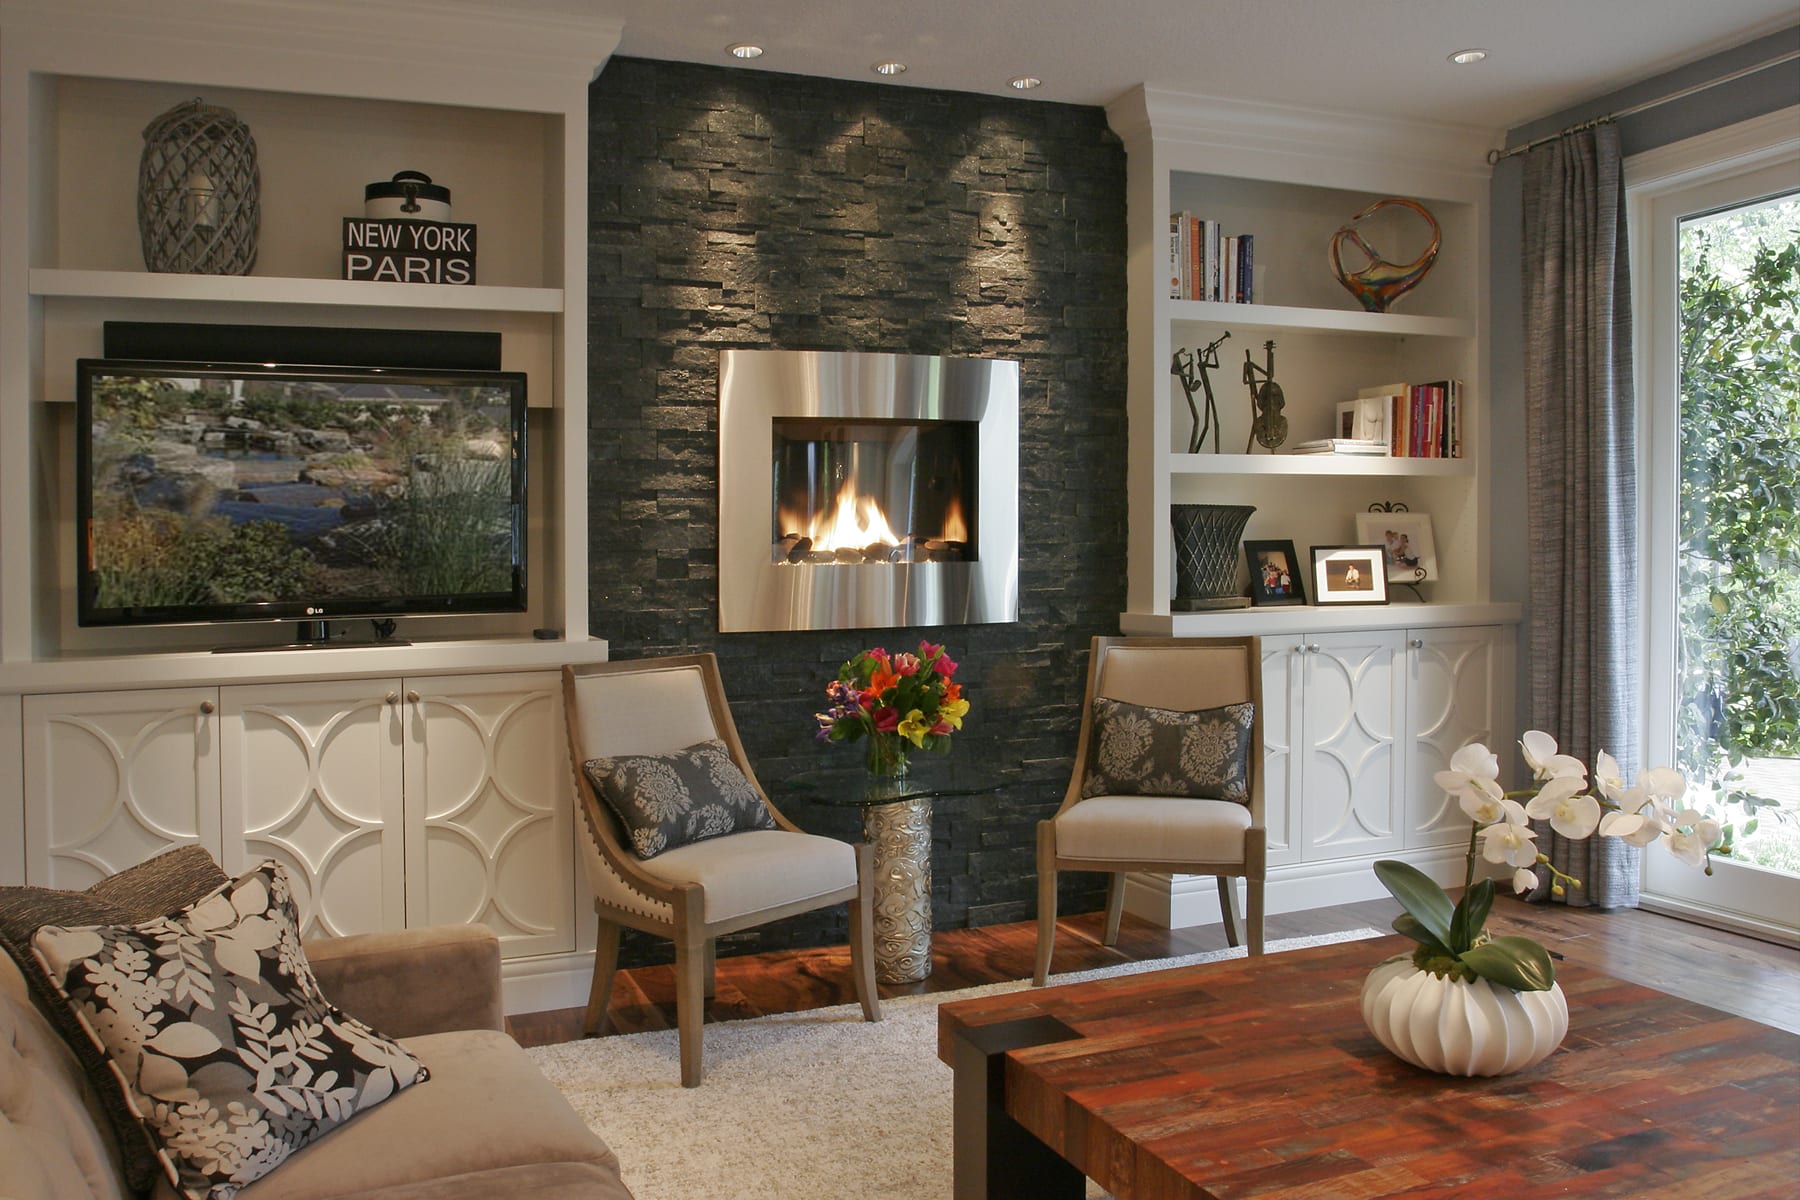 After photo of a fireplace, showcasing the renovated state with updated features and a modern design.